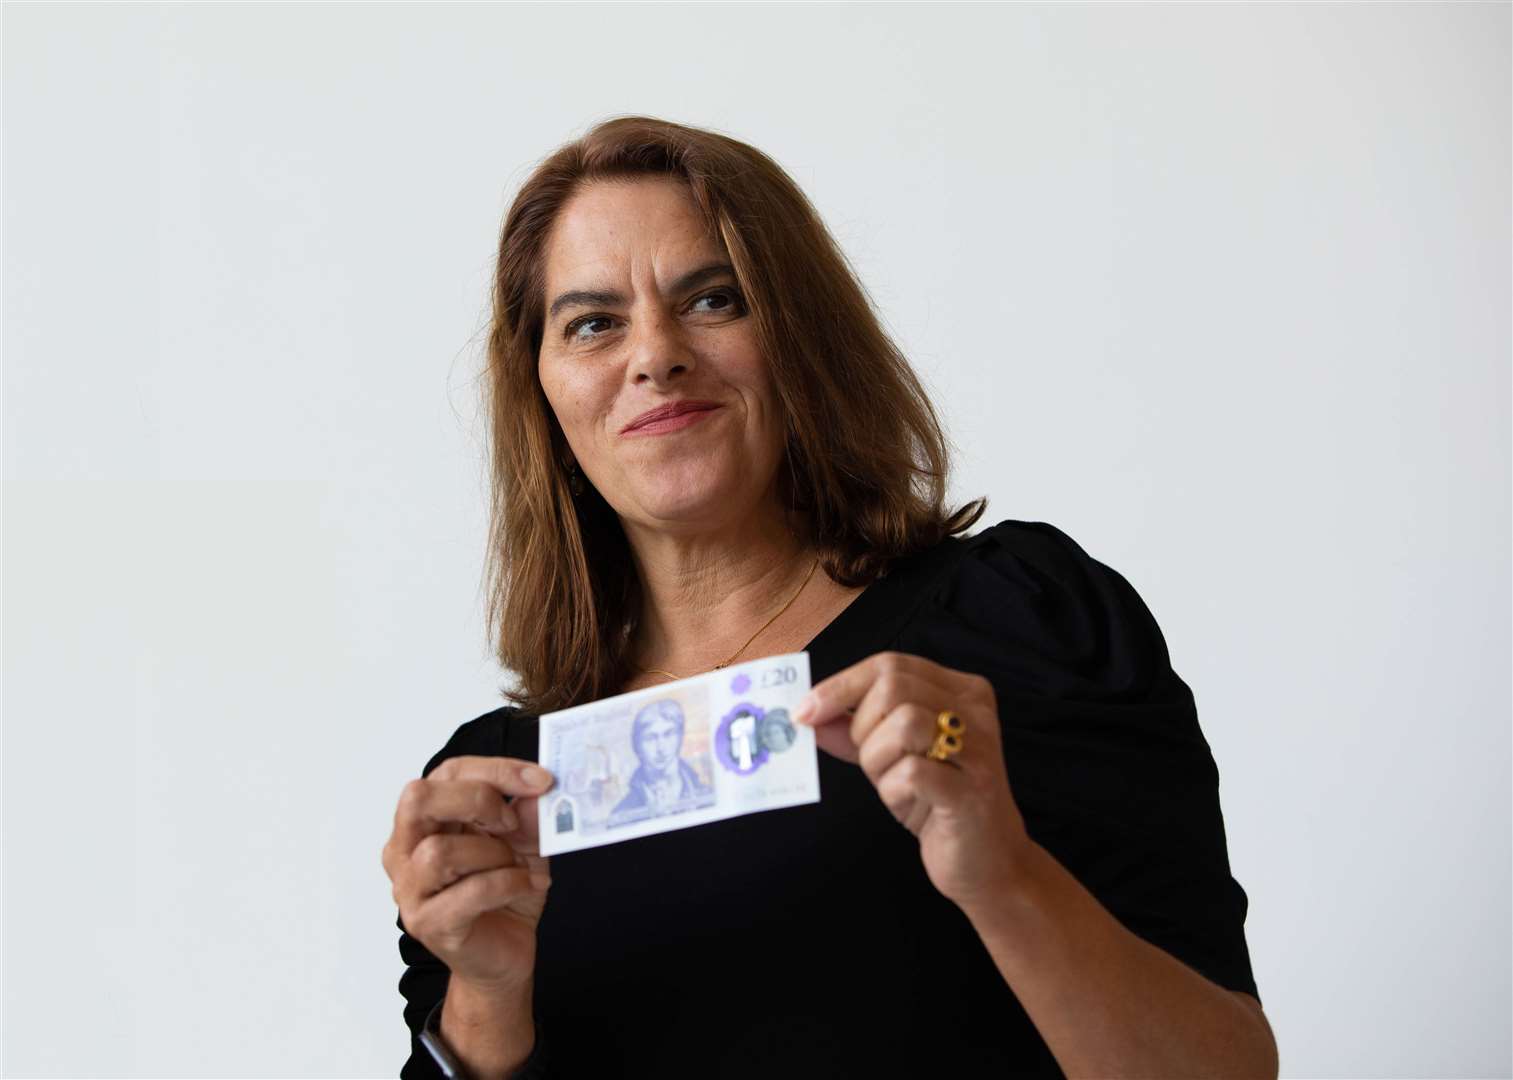 Artist Tracey Emin was one of those who signed the letter. Picture: Bank of England